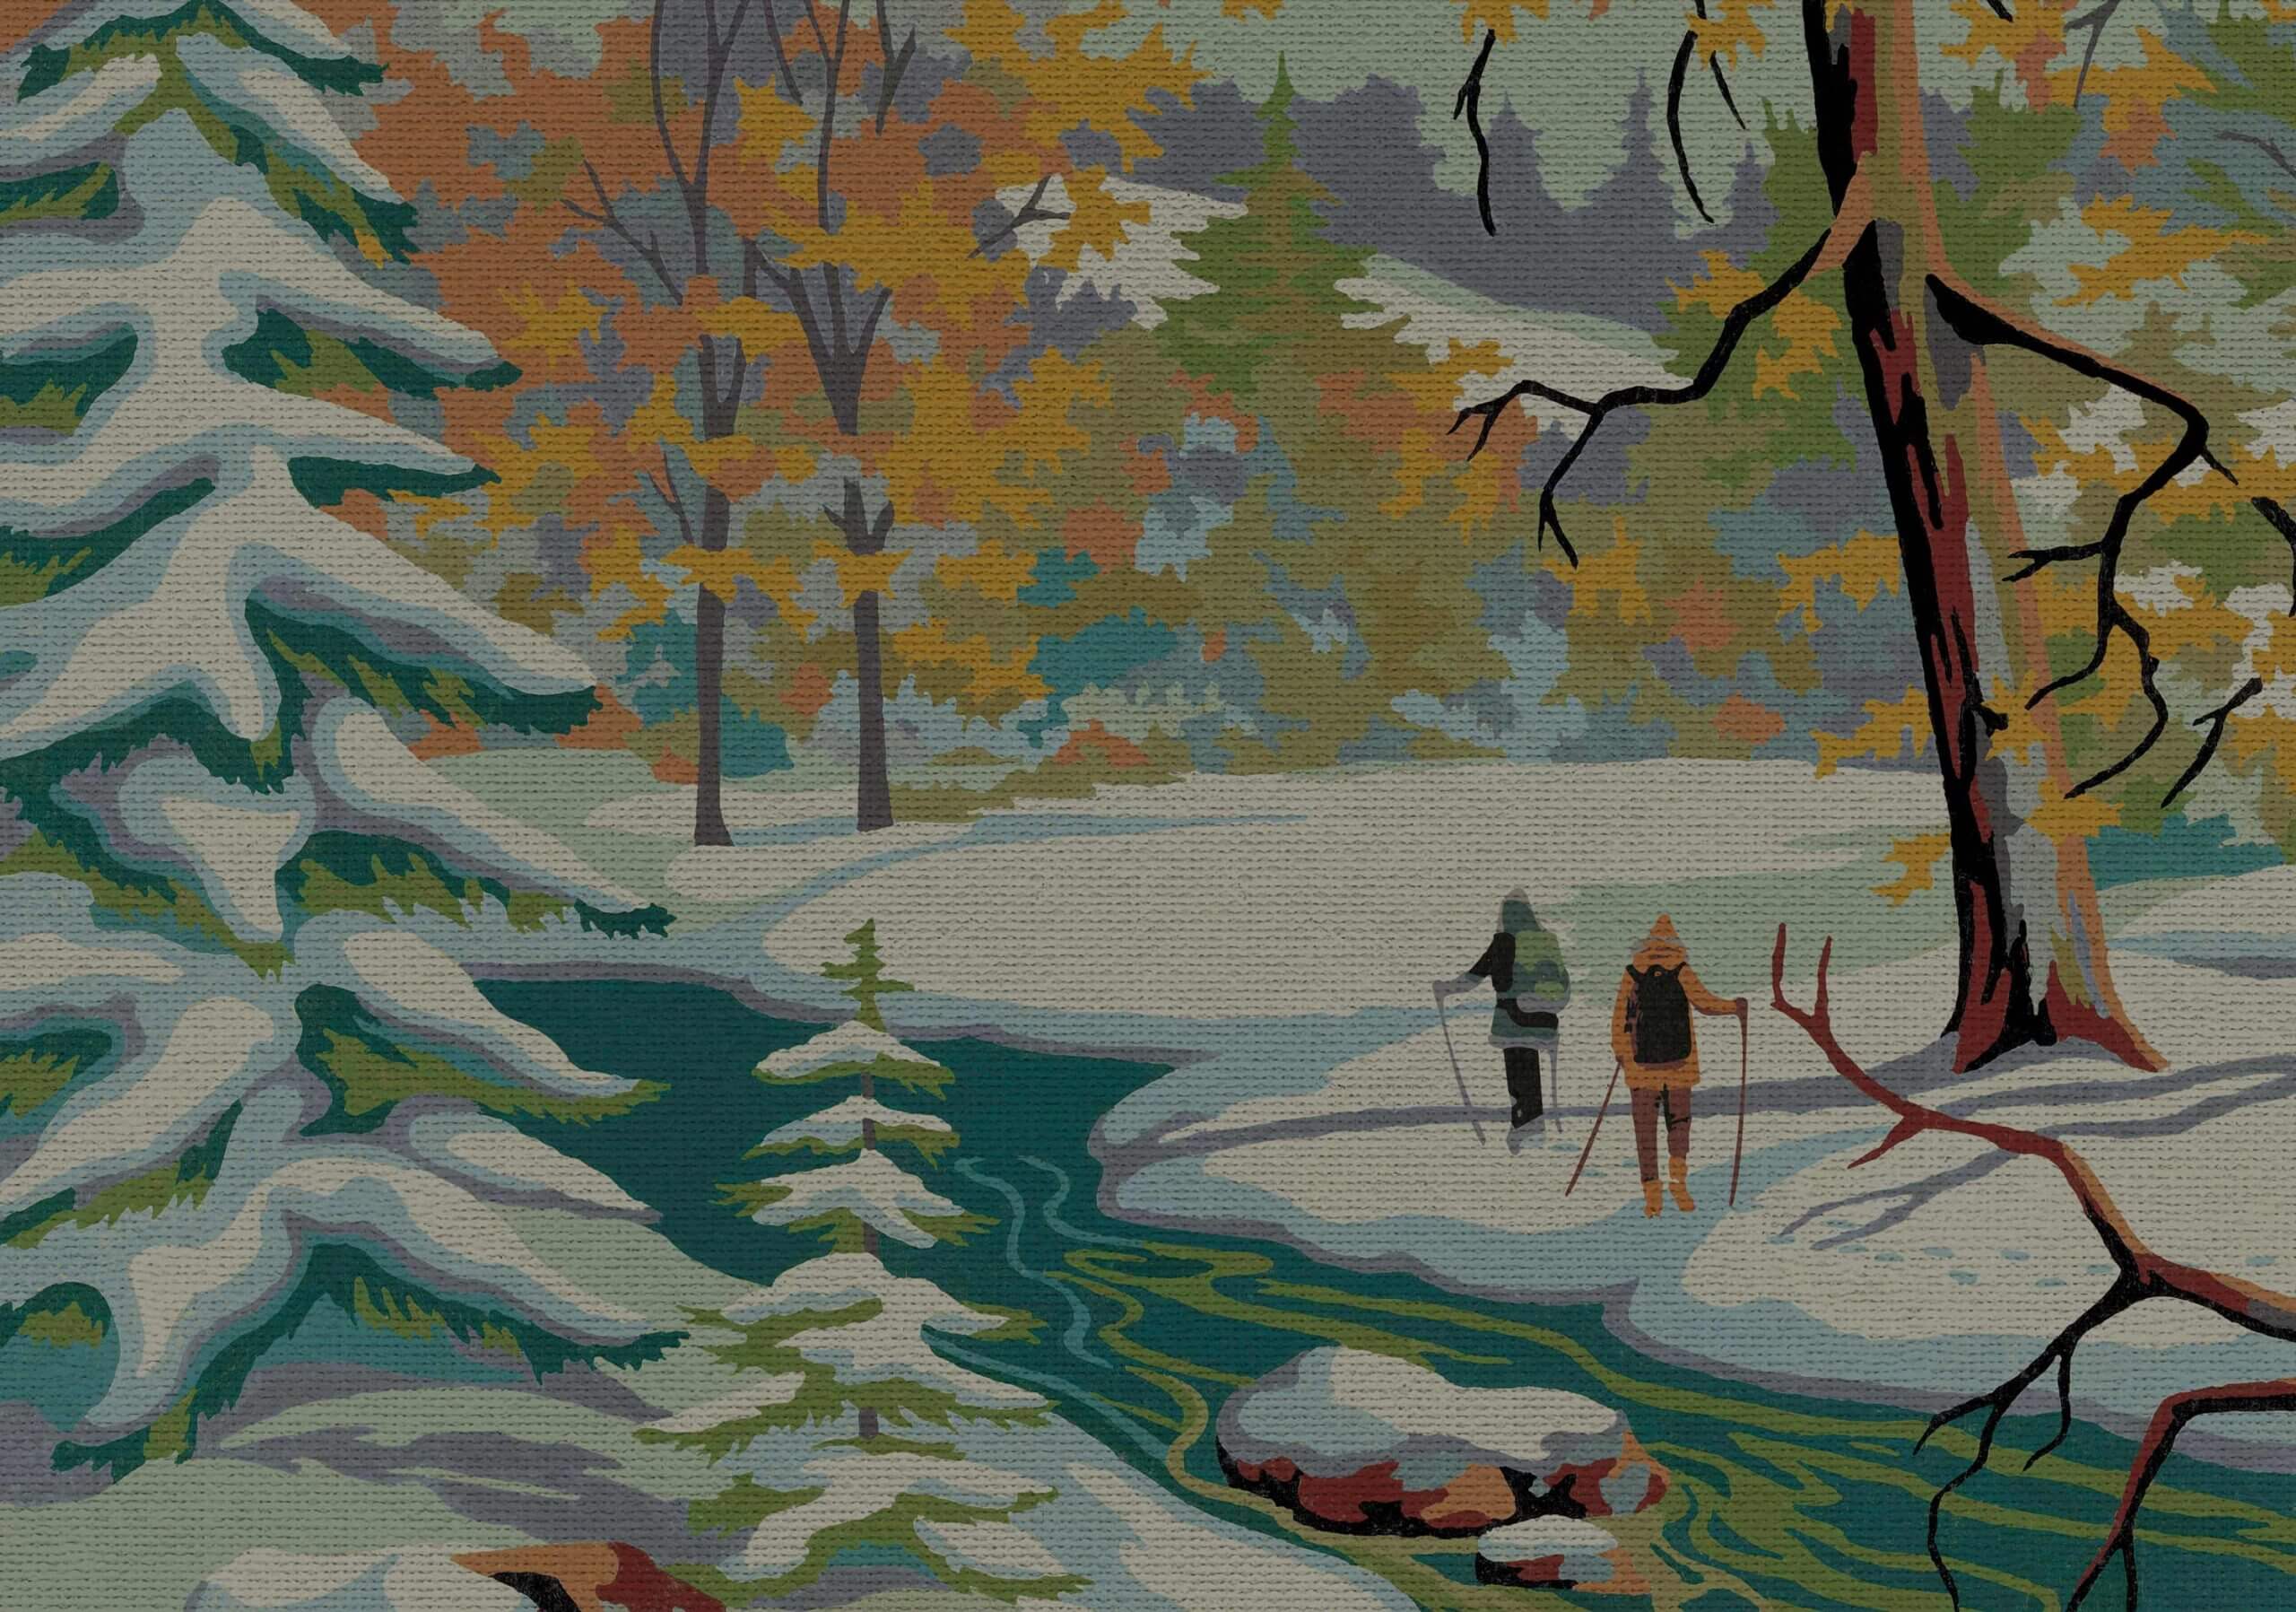 animated picture with 2 people hiking in the snow beside a river